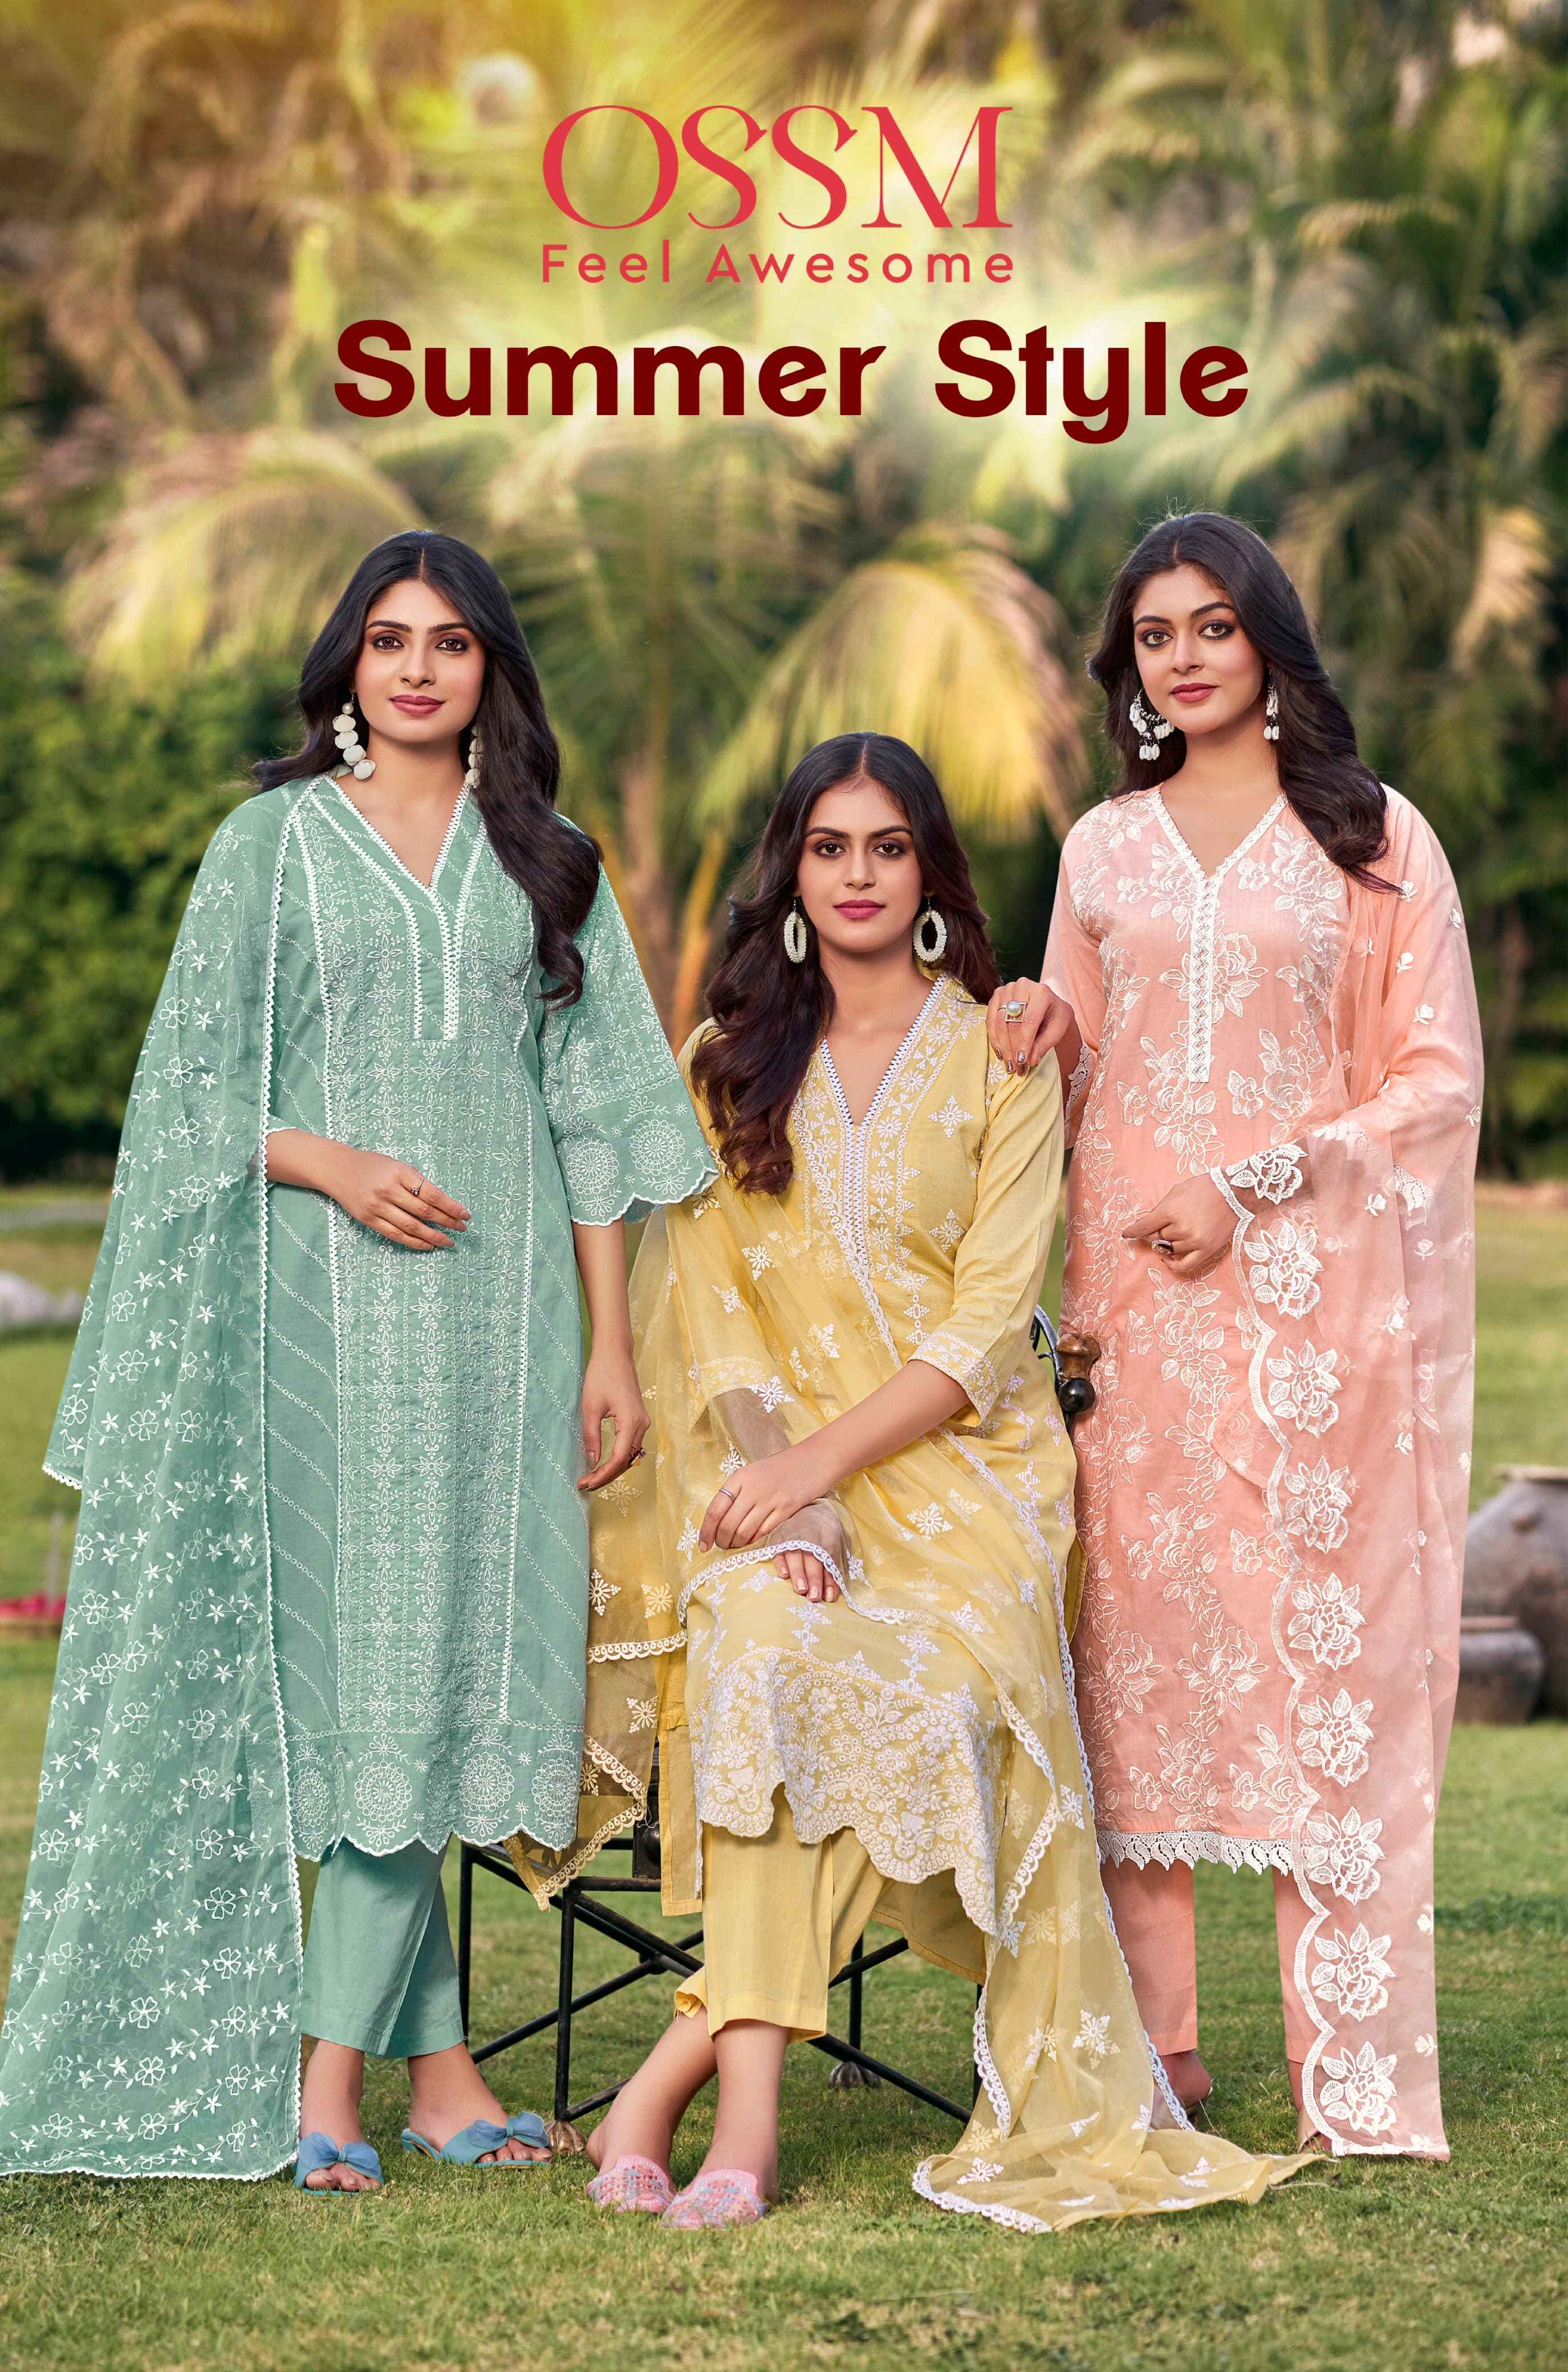 Ossm Summer Style Cotton Readymade Suit 6 Pc Catalog